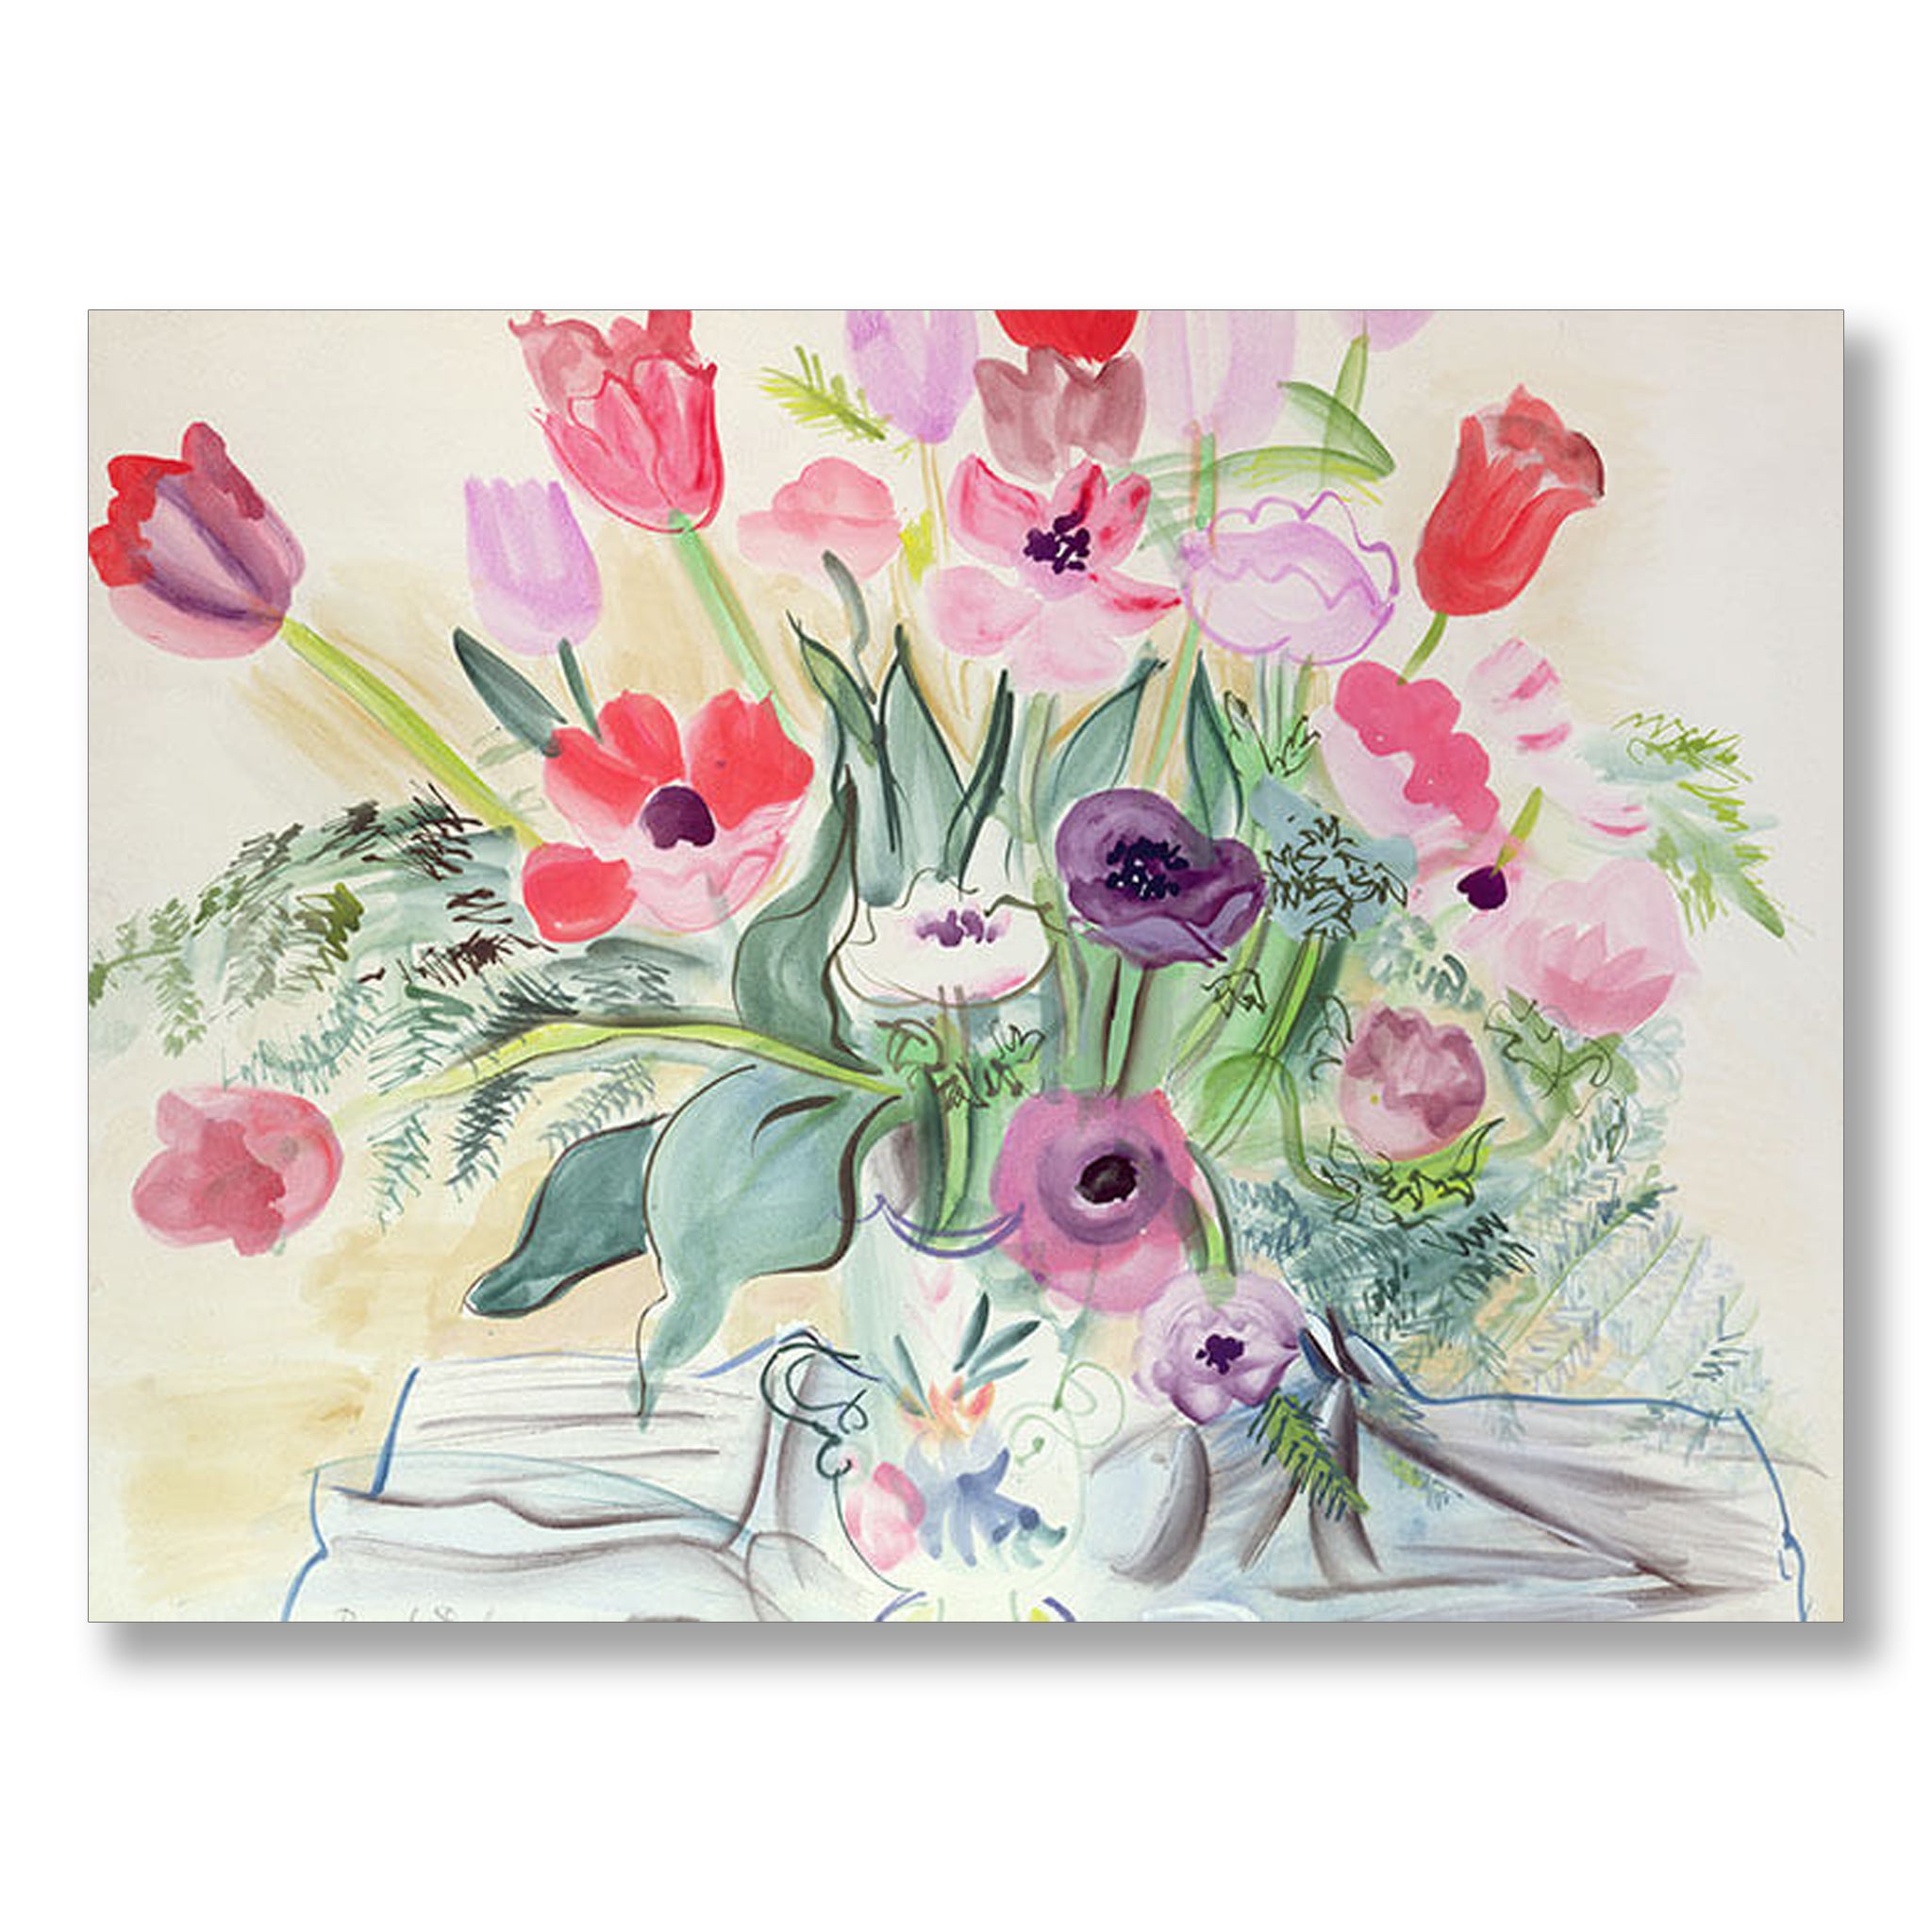 Anemones 1942 by Raoul Dufy